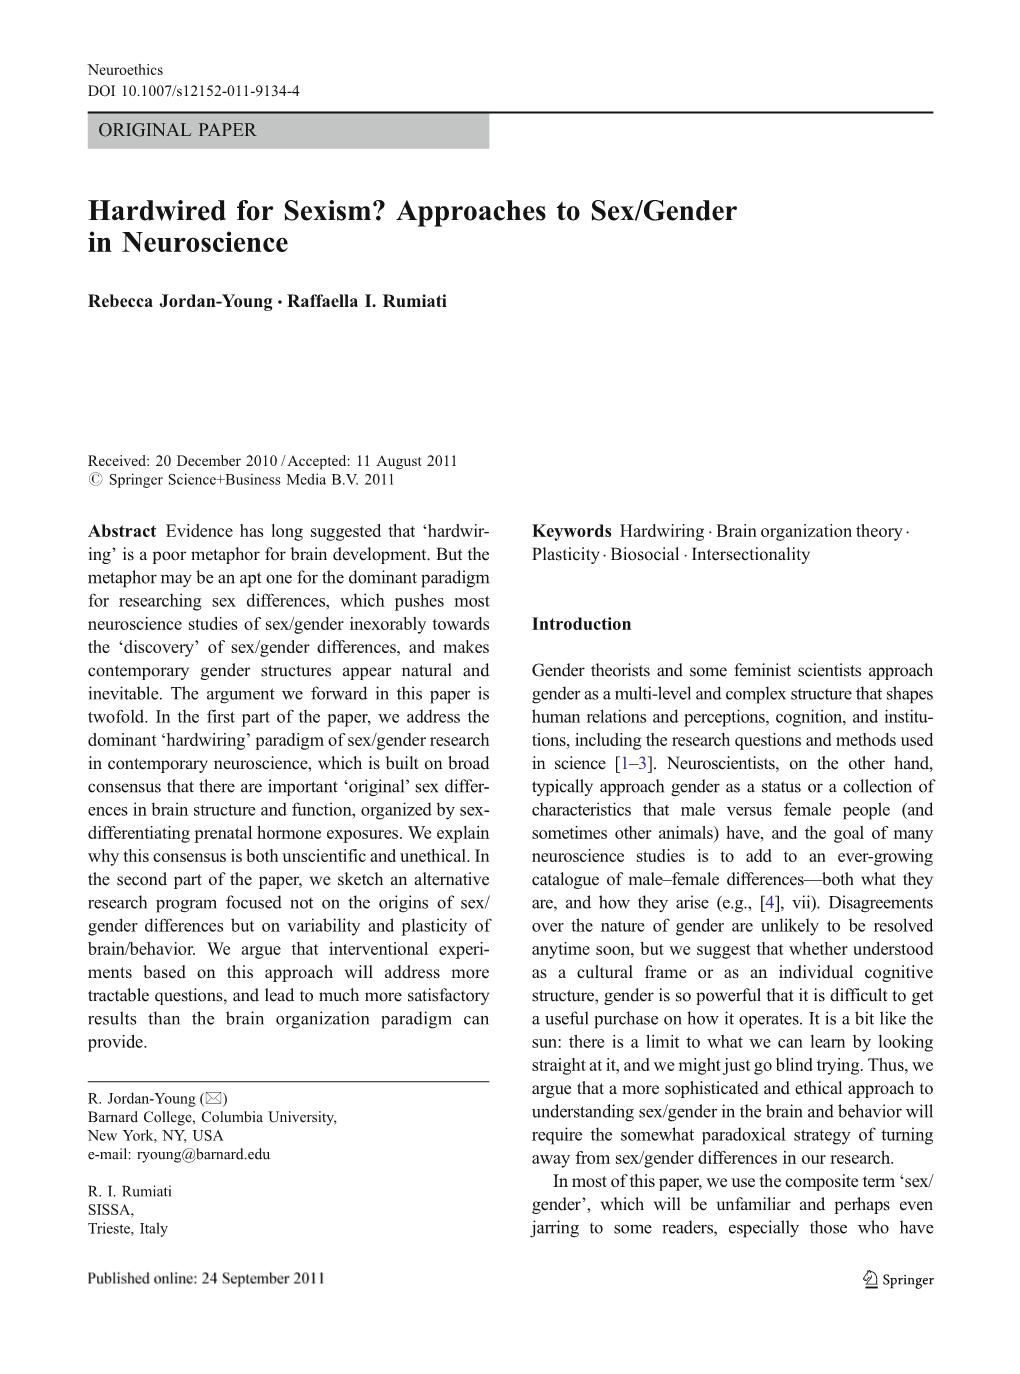 Hardwired for Sexism? Approaches to Sex/Gender in Neuroscience